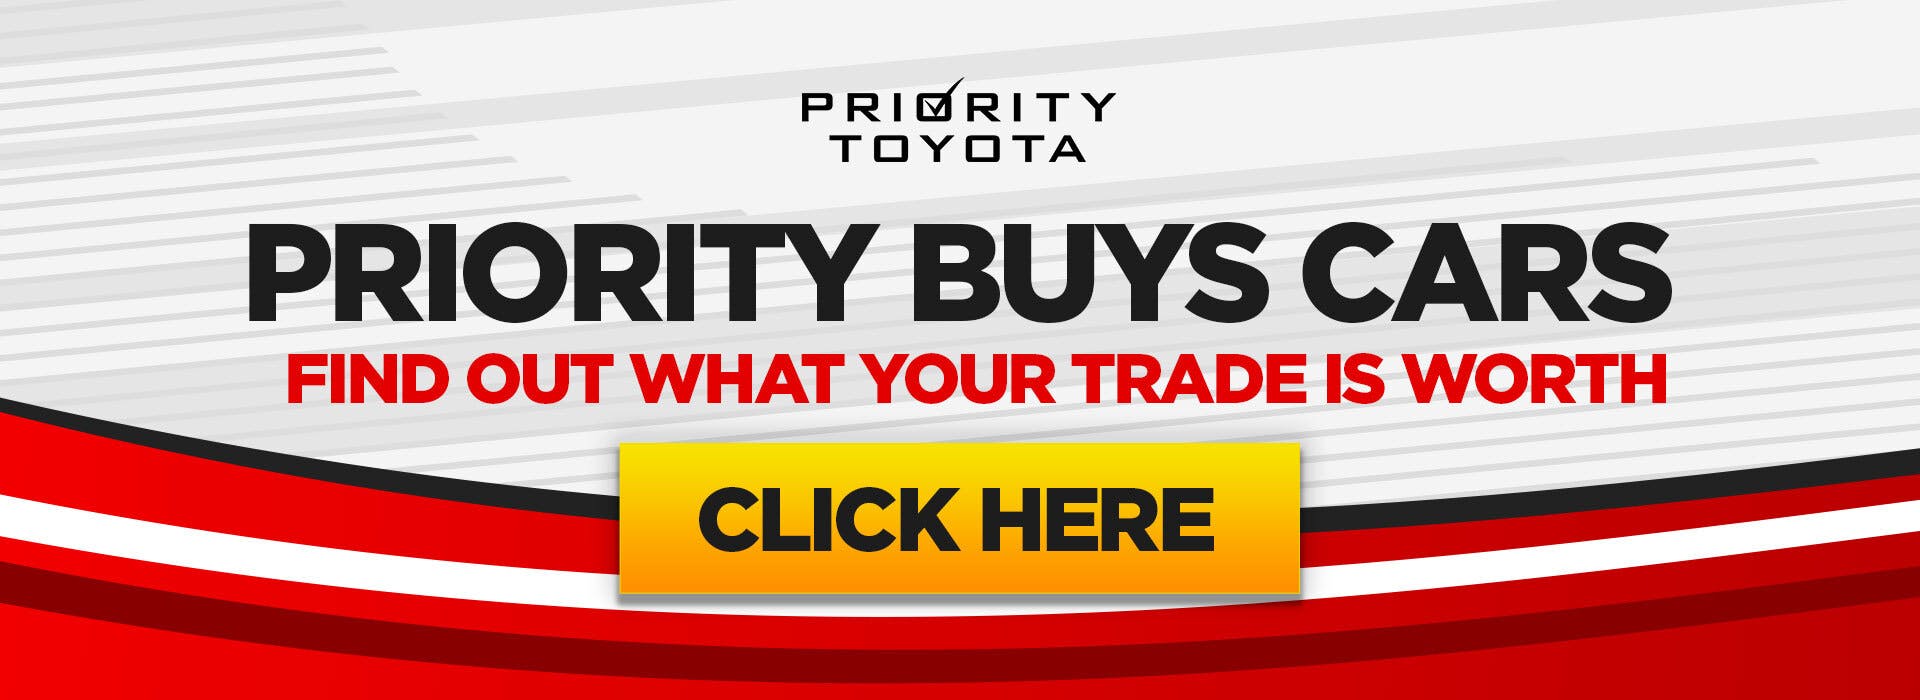 Find out what your trade is worth